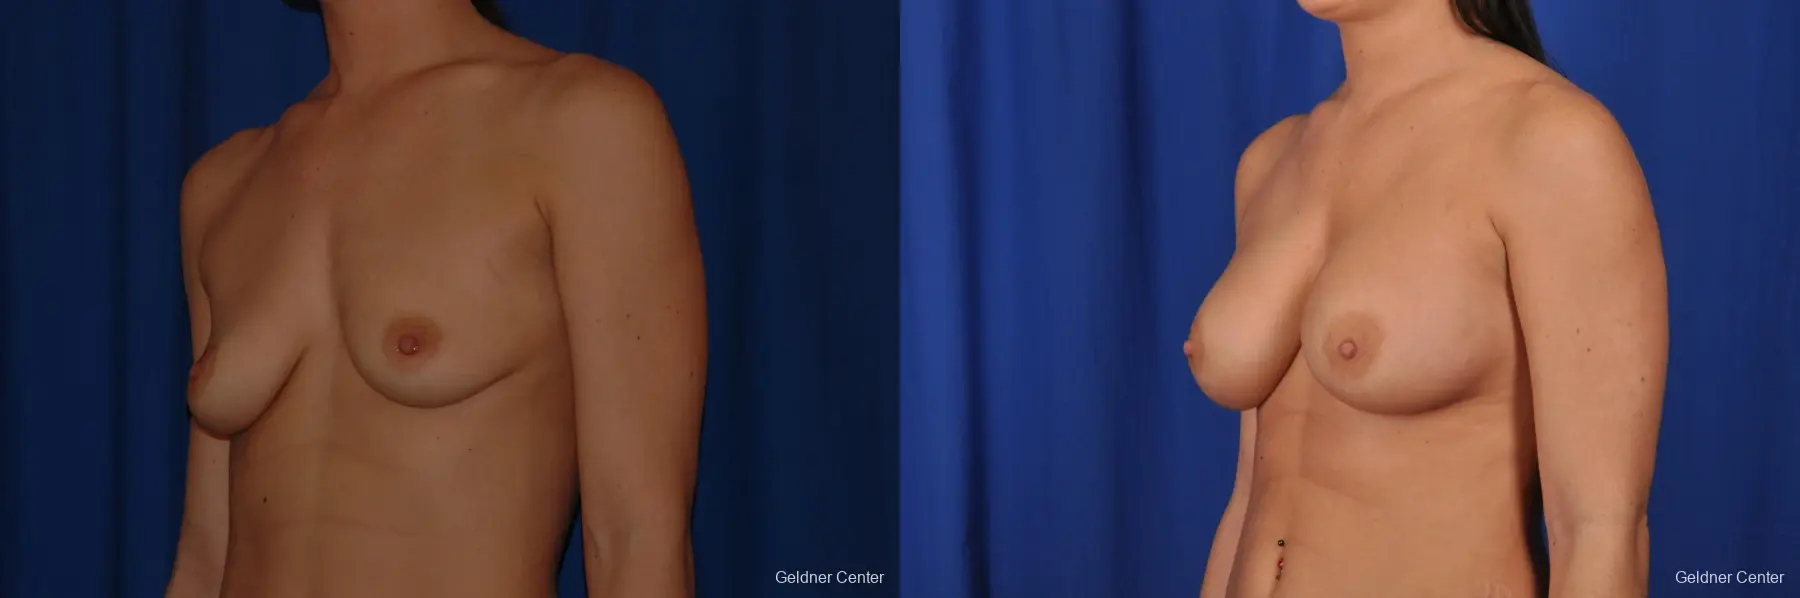 Breast Augmentation Streeterville, Chicago 2071 - Before and After 4